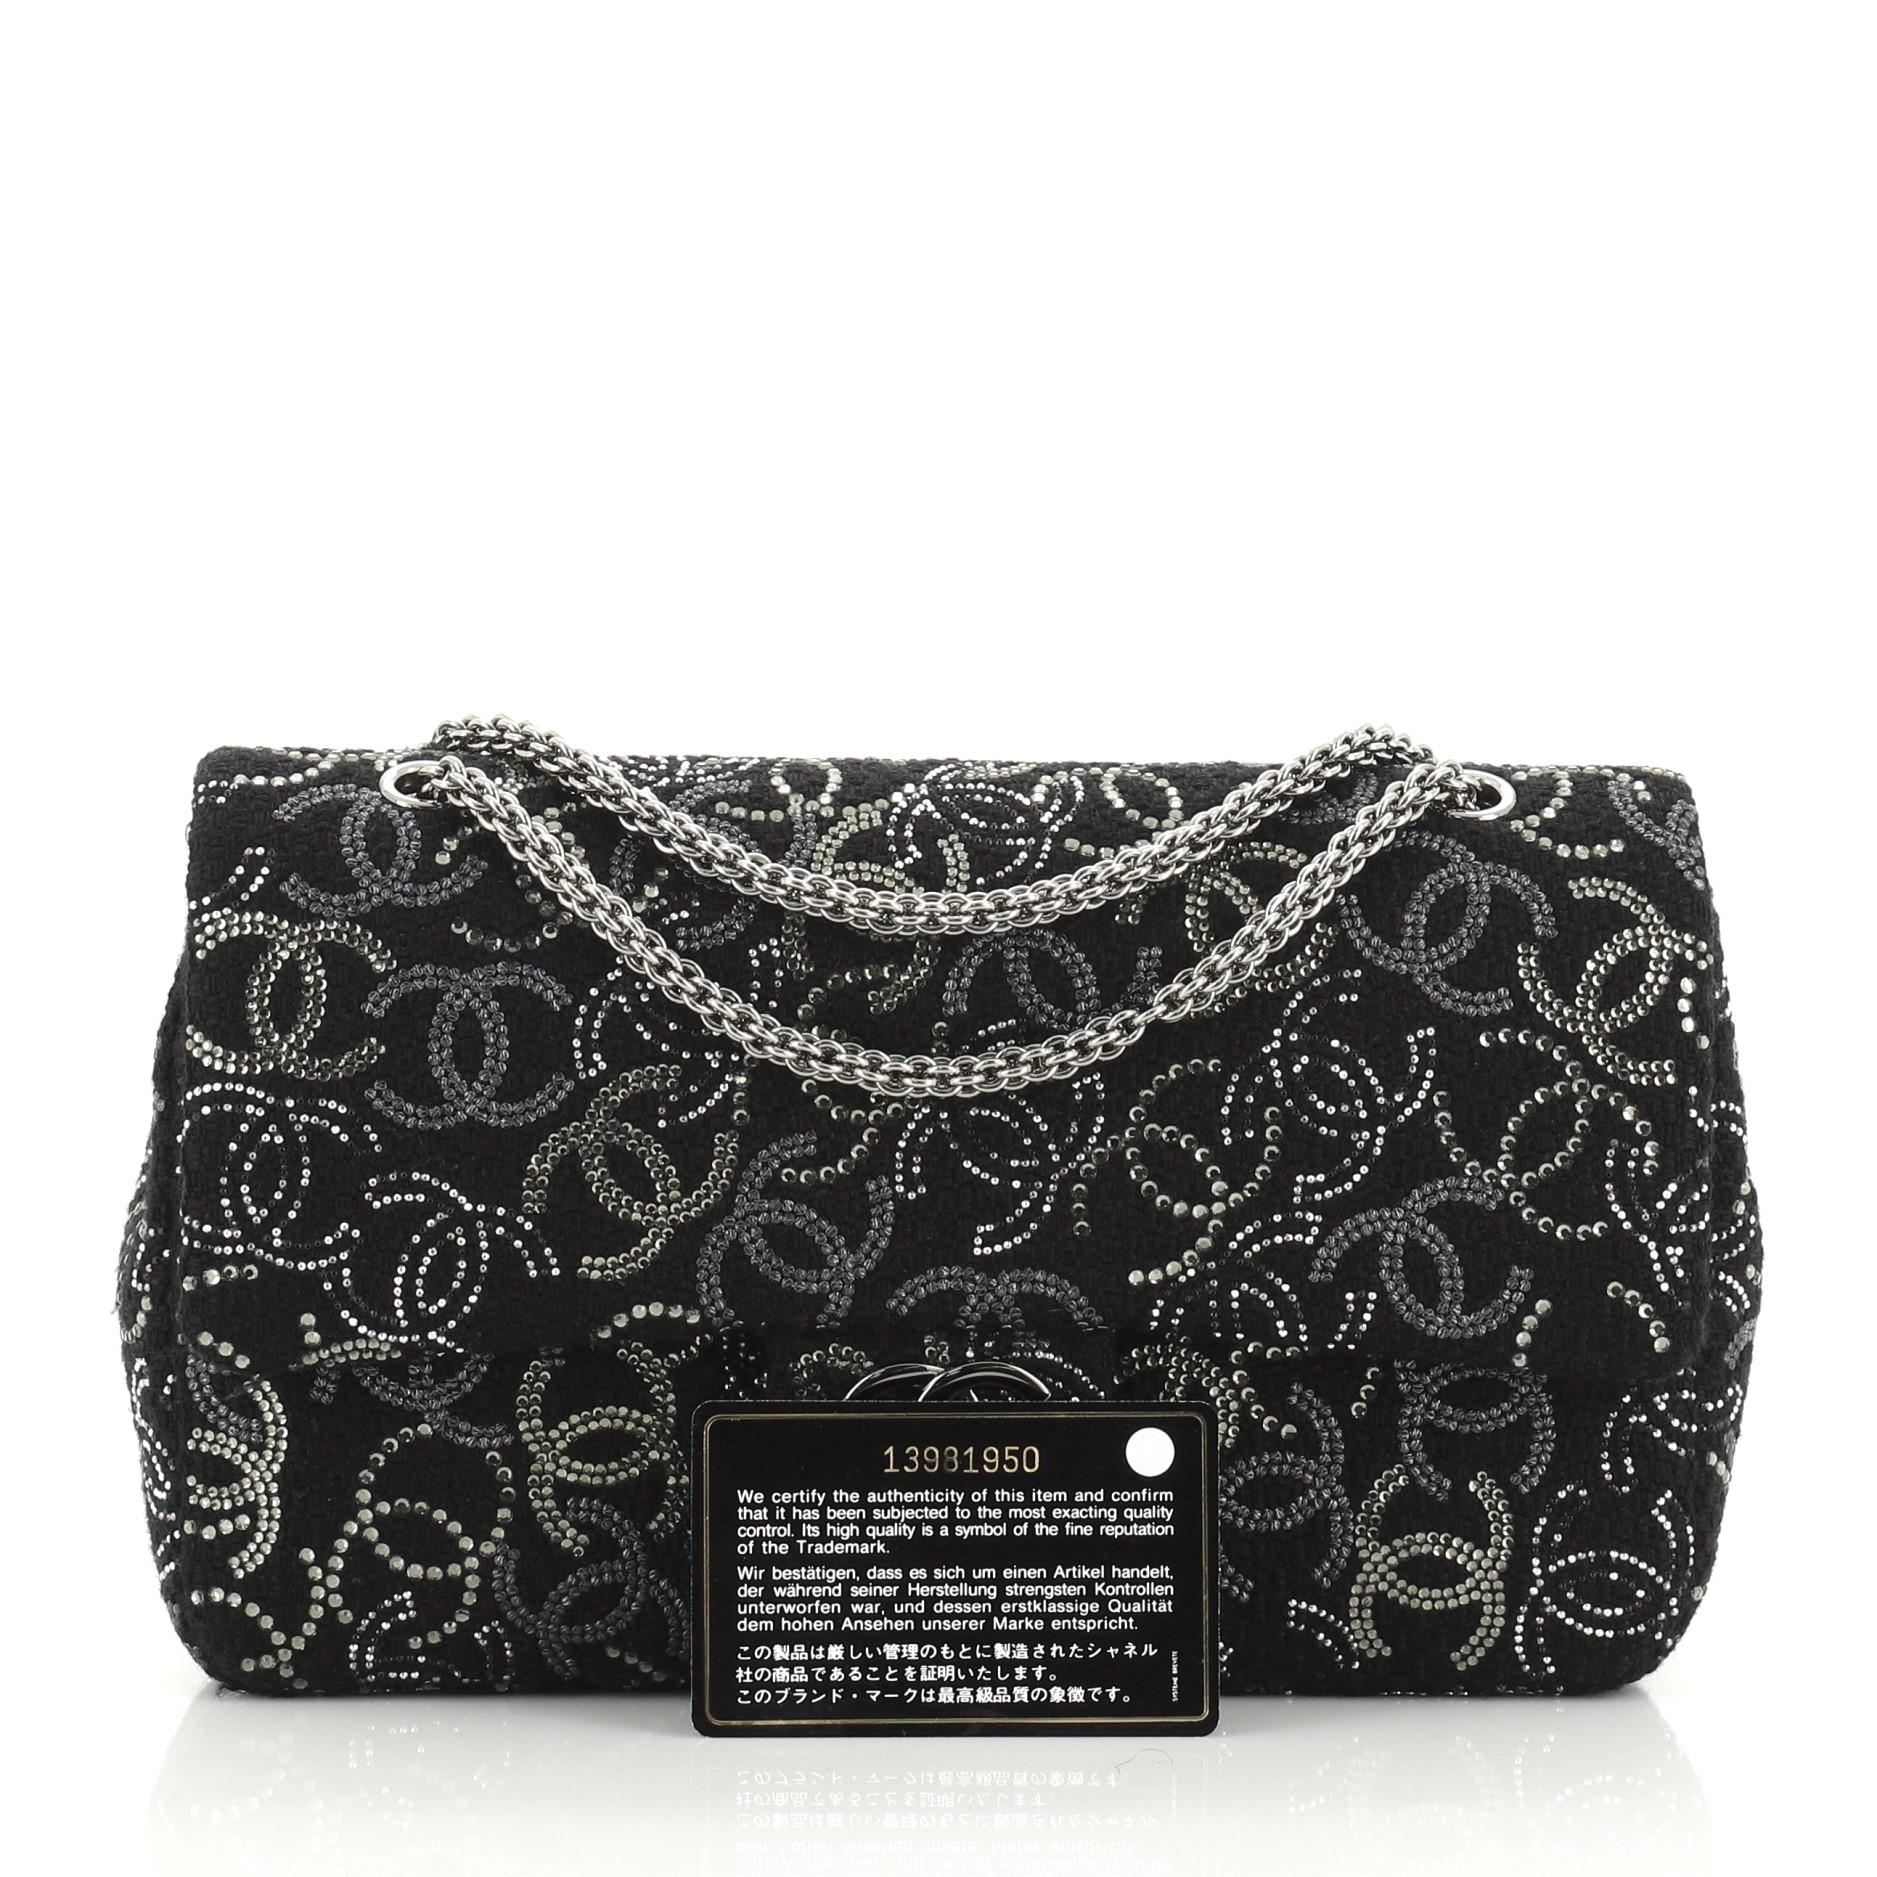 This Chanel Paris-Shanghai Pudong Flap Bag Strass Embellished Tweed Medium is a limited edition bag from the Pre-Fall 2010 Collection. Crafted from black strass embellished tweed, it features chain link shoulder strap, strass CC logo embroidery